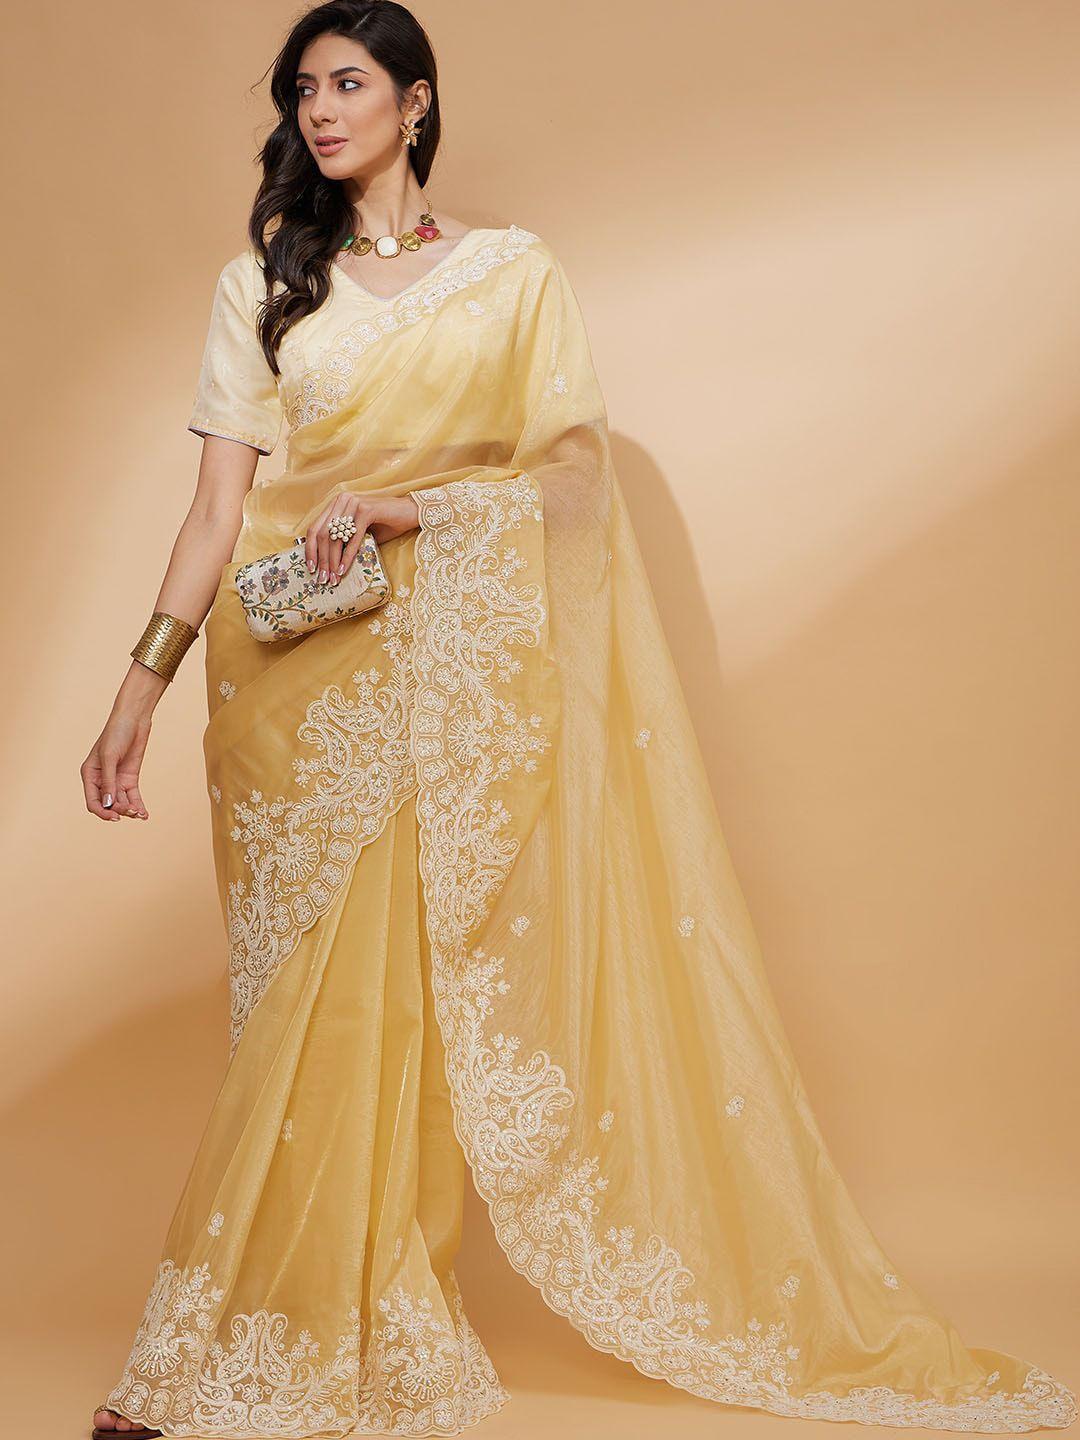 all about you organza embroidery cut work with lace border saree